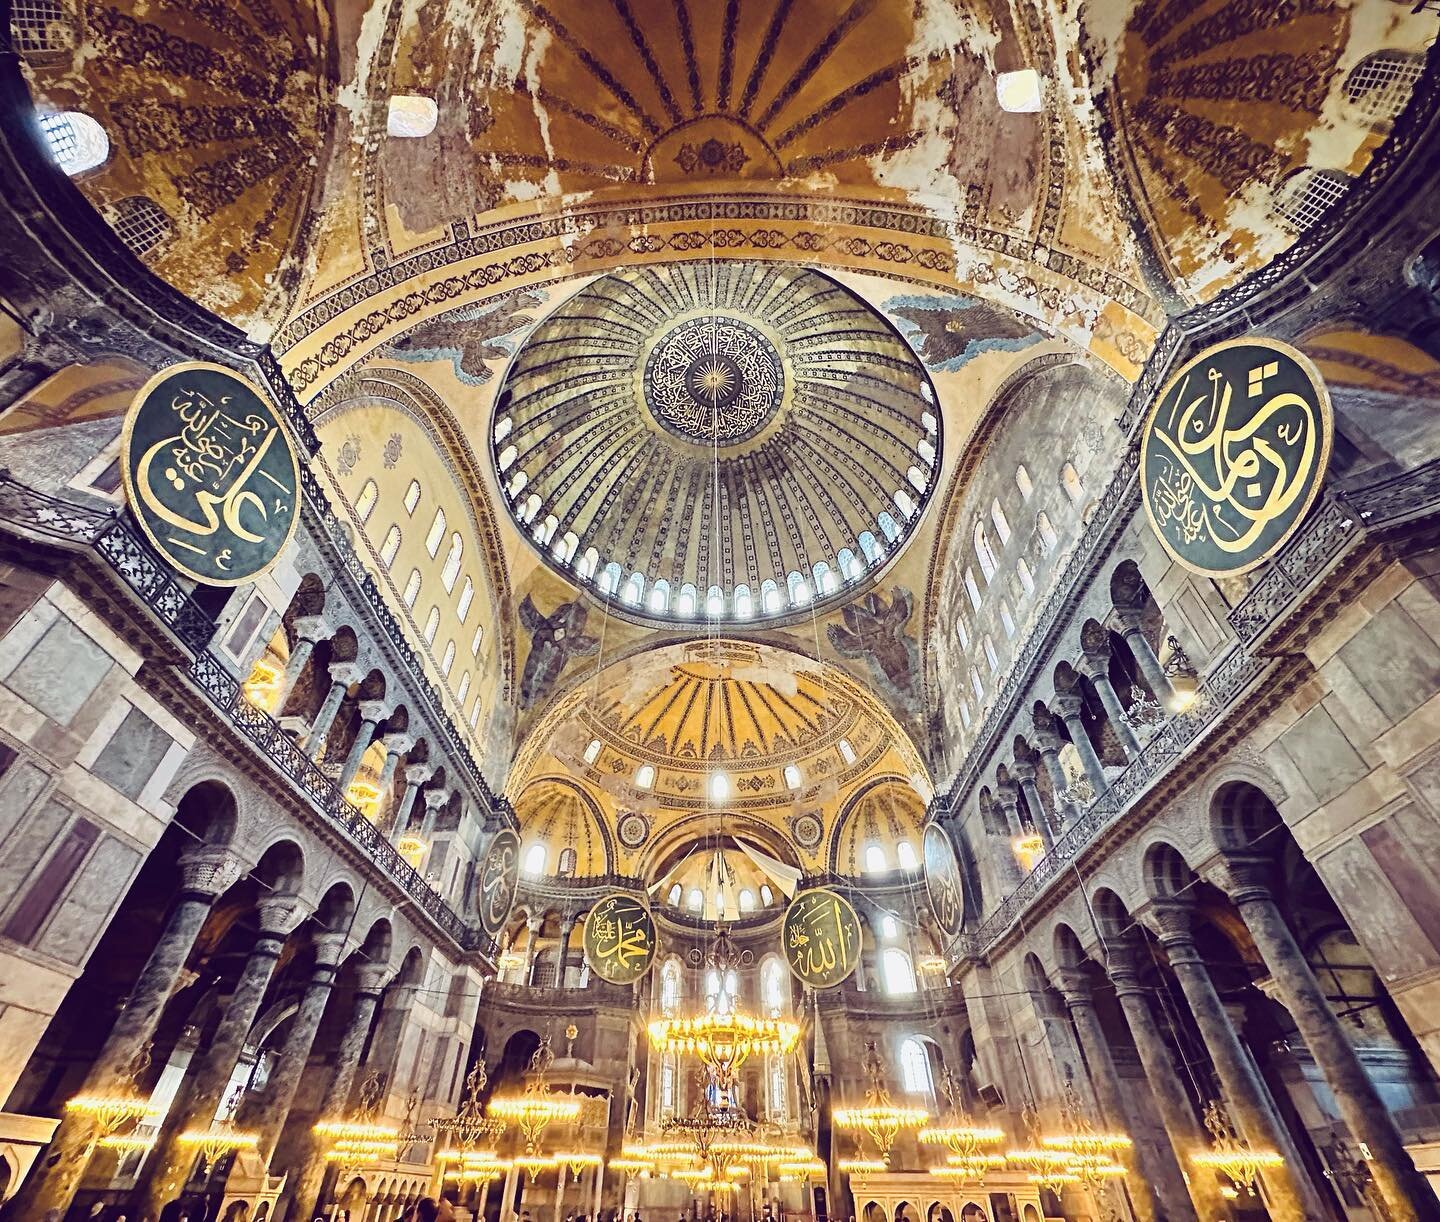 The magnificent Hagia Sophia. Monument of Byzantine architecture, historic icon of Christianity and Islam. 😍